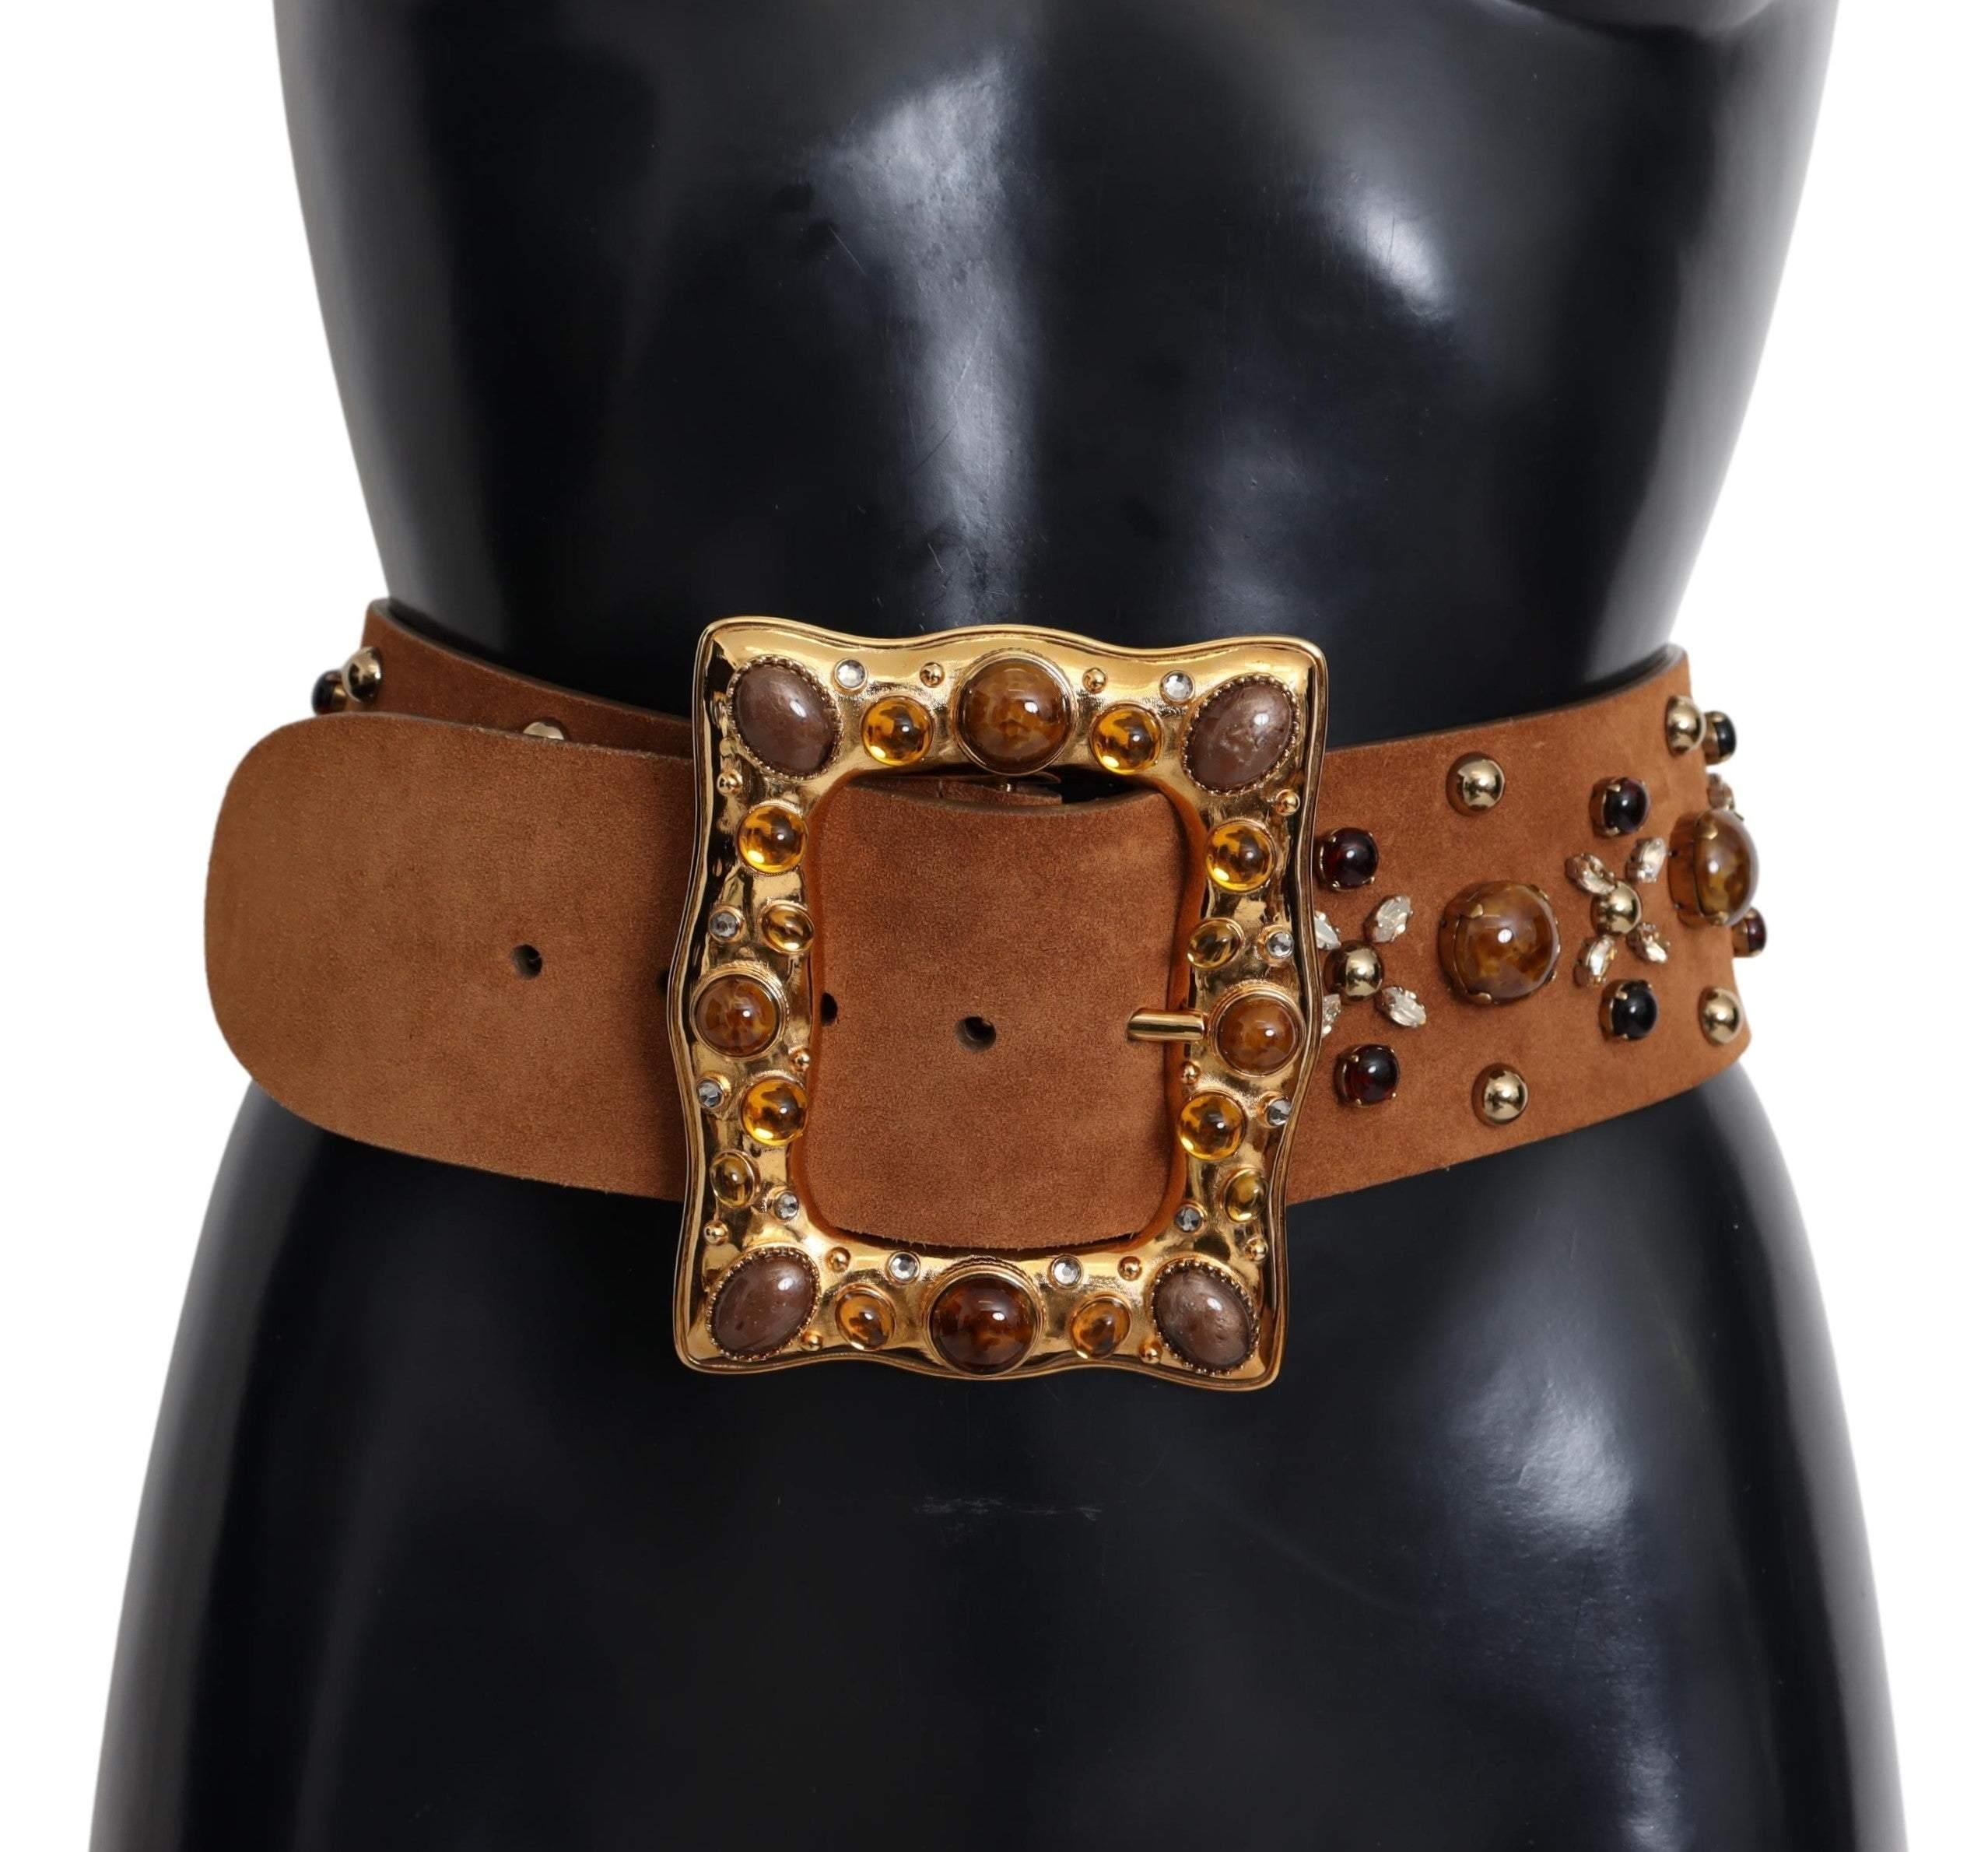 The Lair Oval Buckle Belt Brass